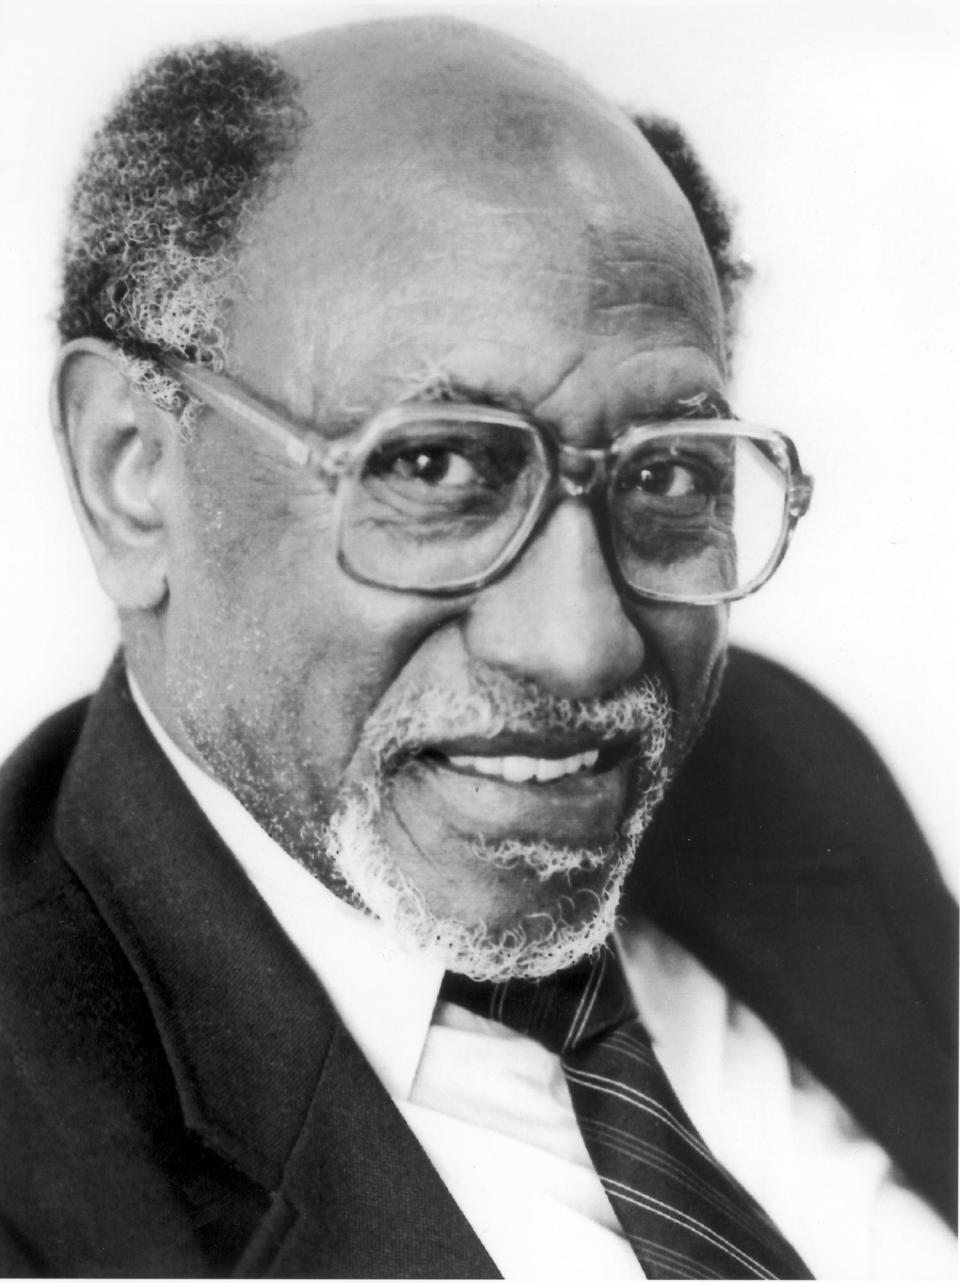 A portrait of civil rights leader Dr. Timuel Black, who died Oct. 13, 2021, in Chicago. He was 102.